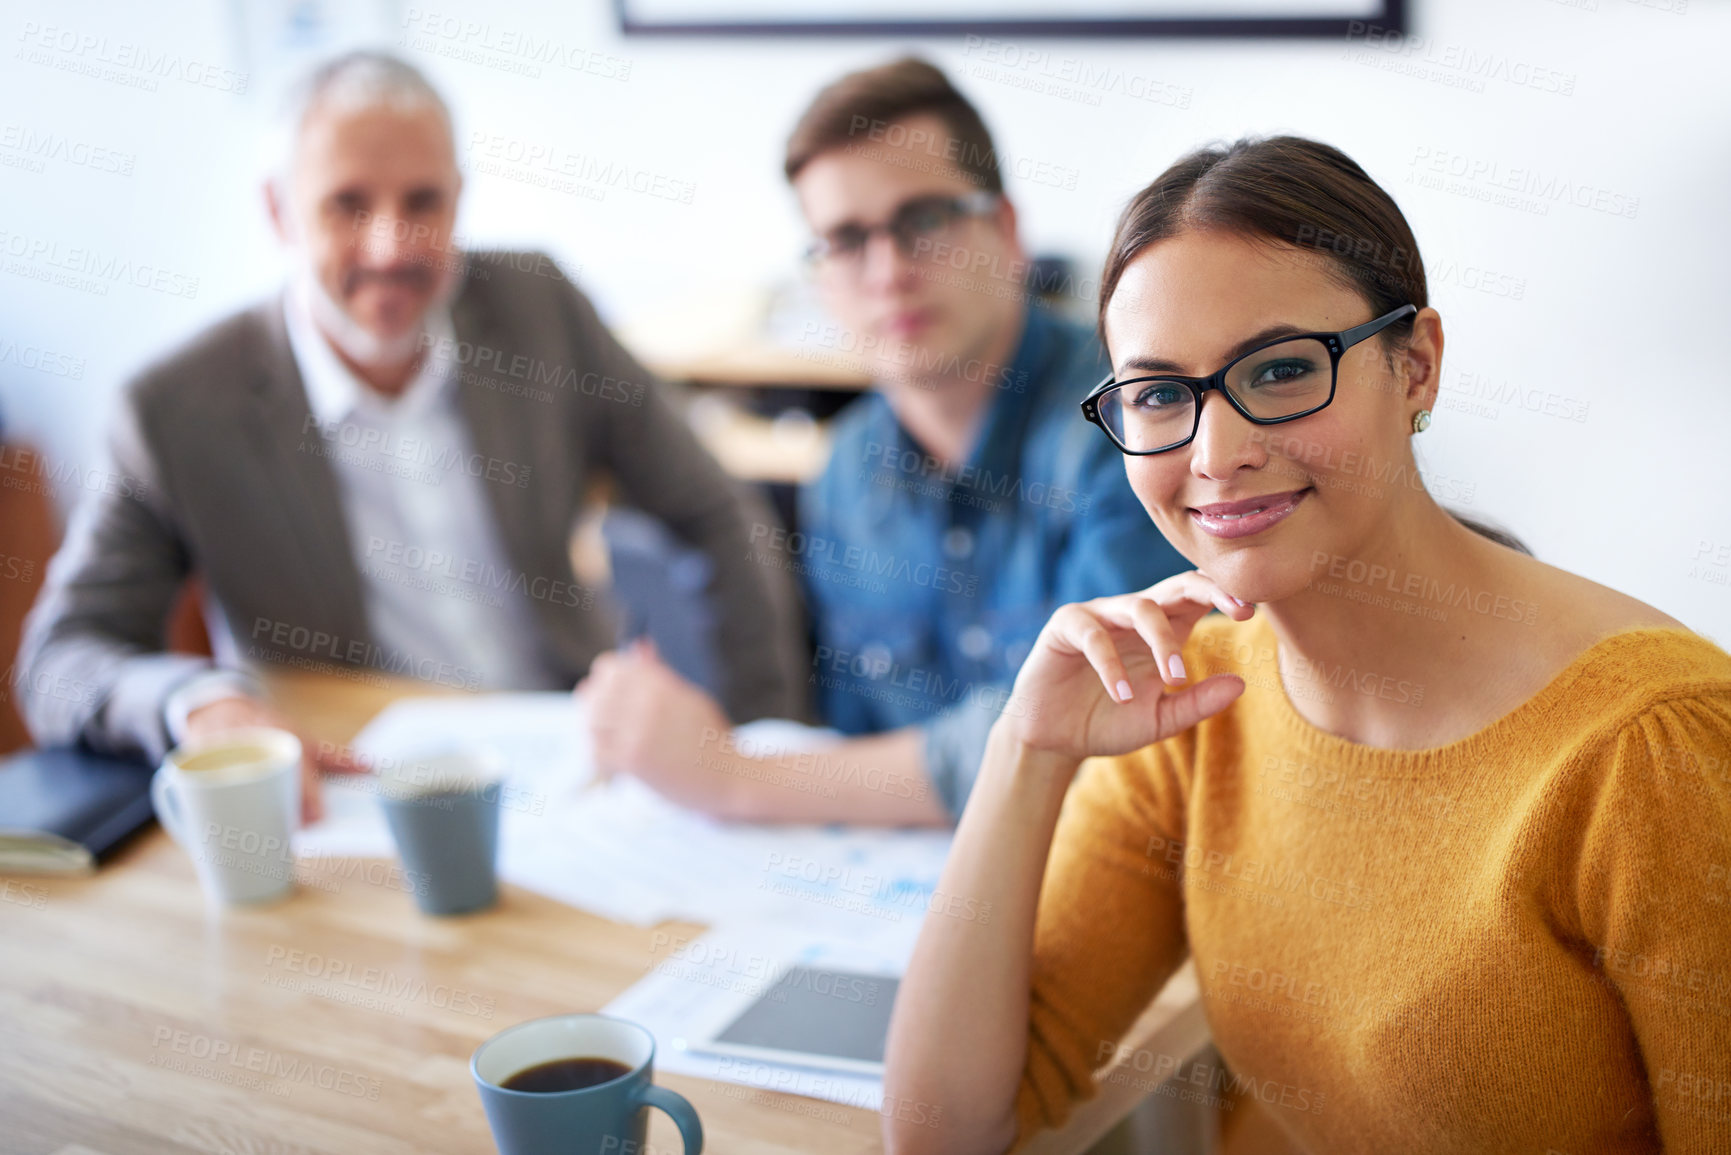 Buy stock photo Cropped shot of creative businesspeople working in their office